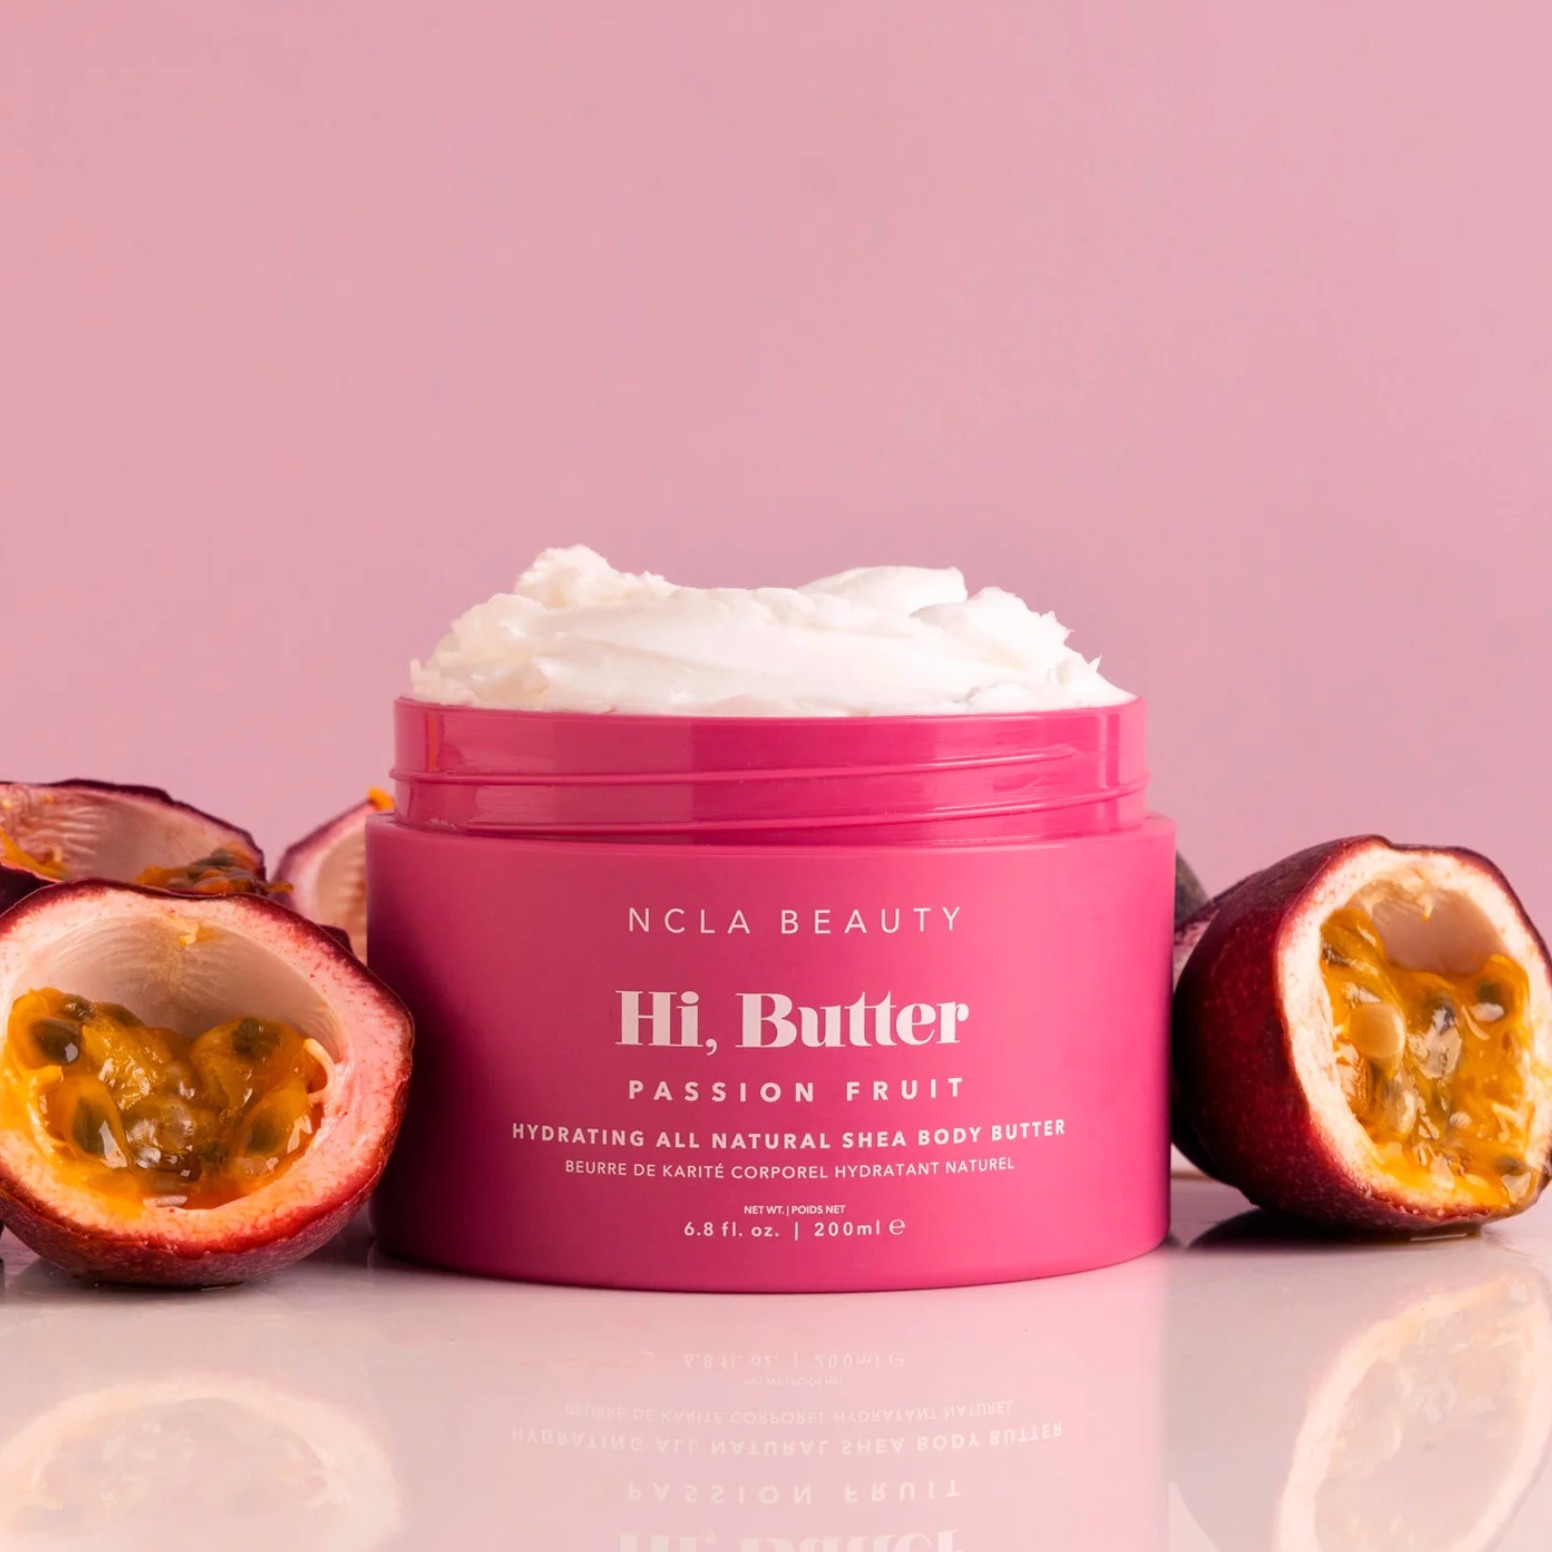 NCLA Hi, Butter pink container with passionfruits surrounding the container.